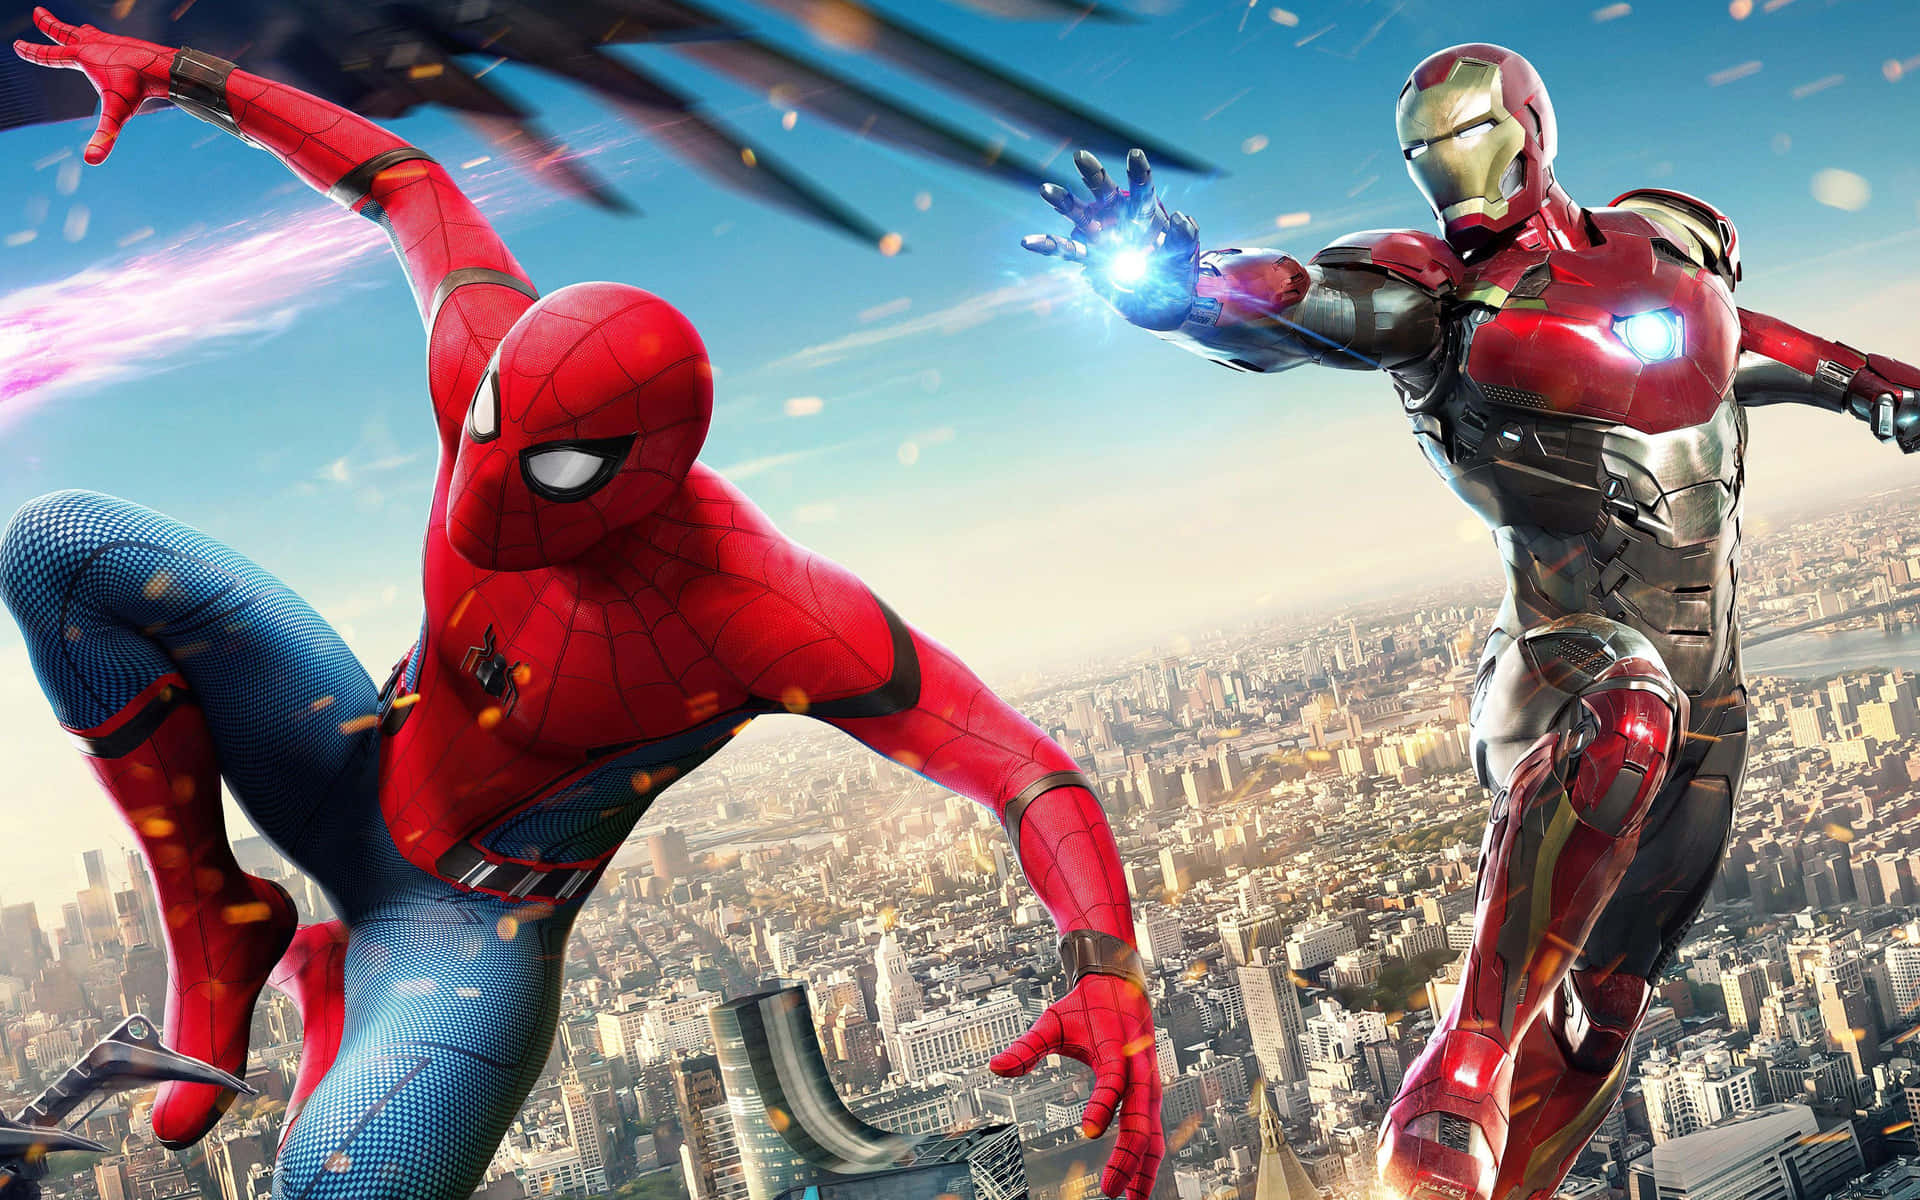 Spider Man and Iron Man - Marvel's Finest Heroes Wallpaper